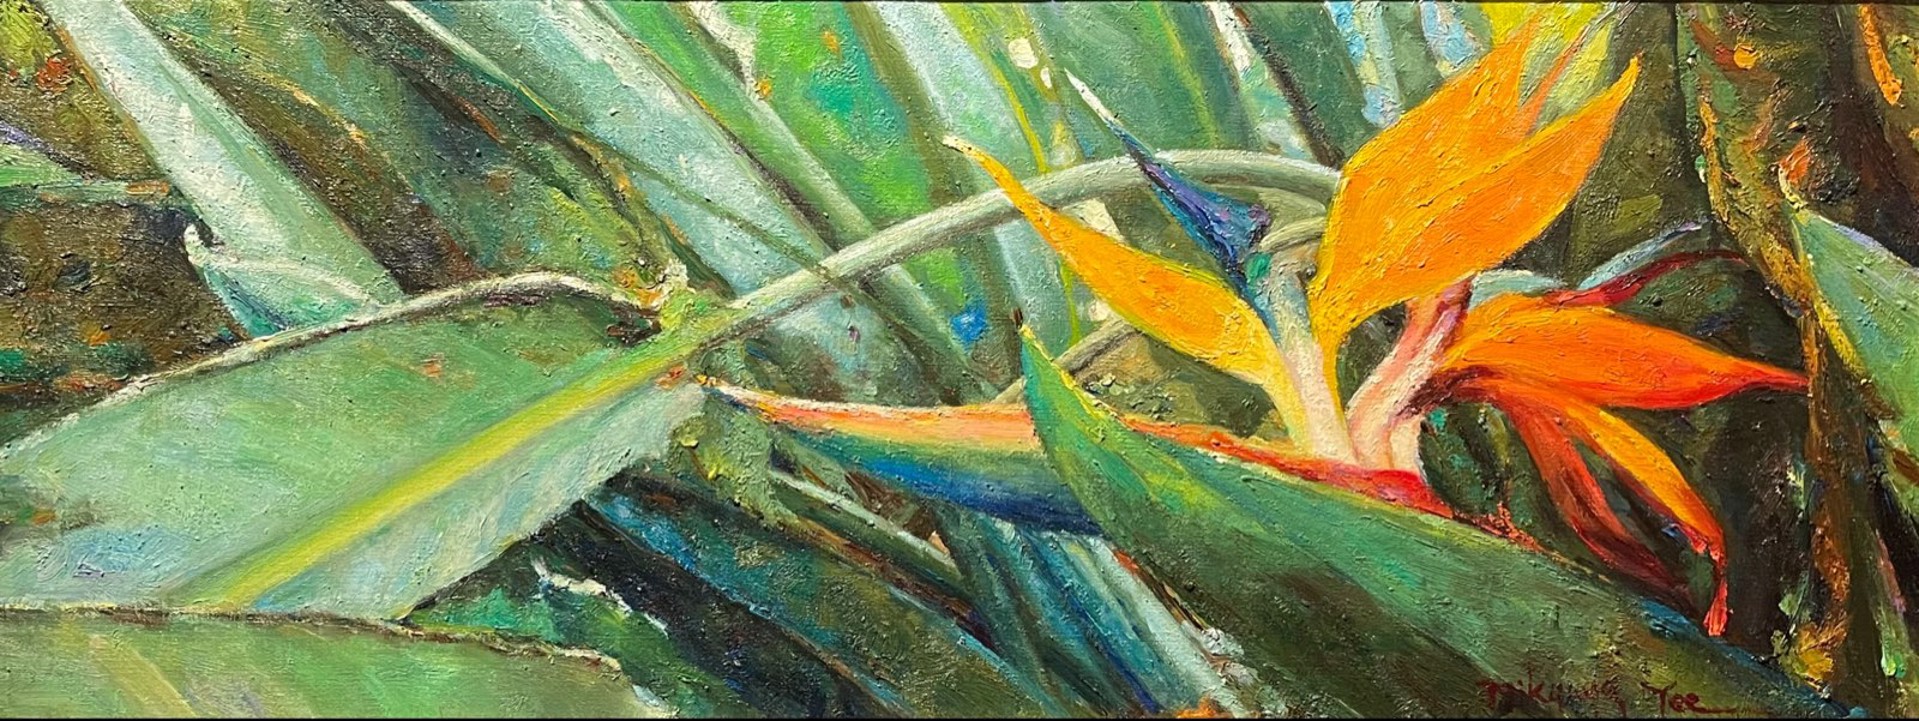 Bird of Paradise by Mikyung Yee